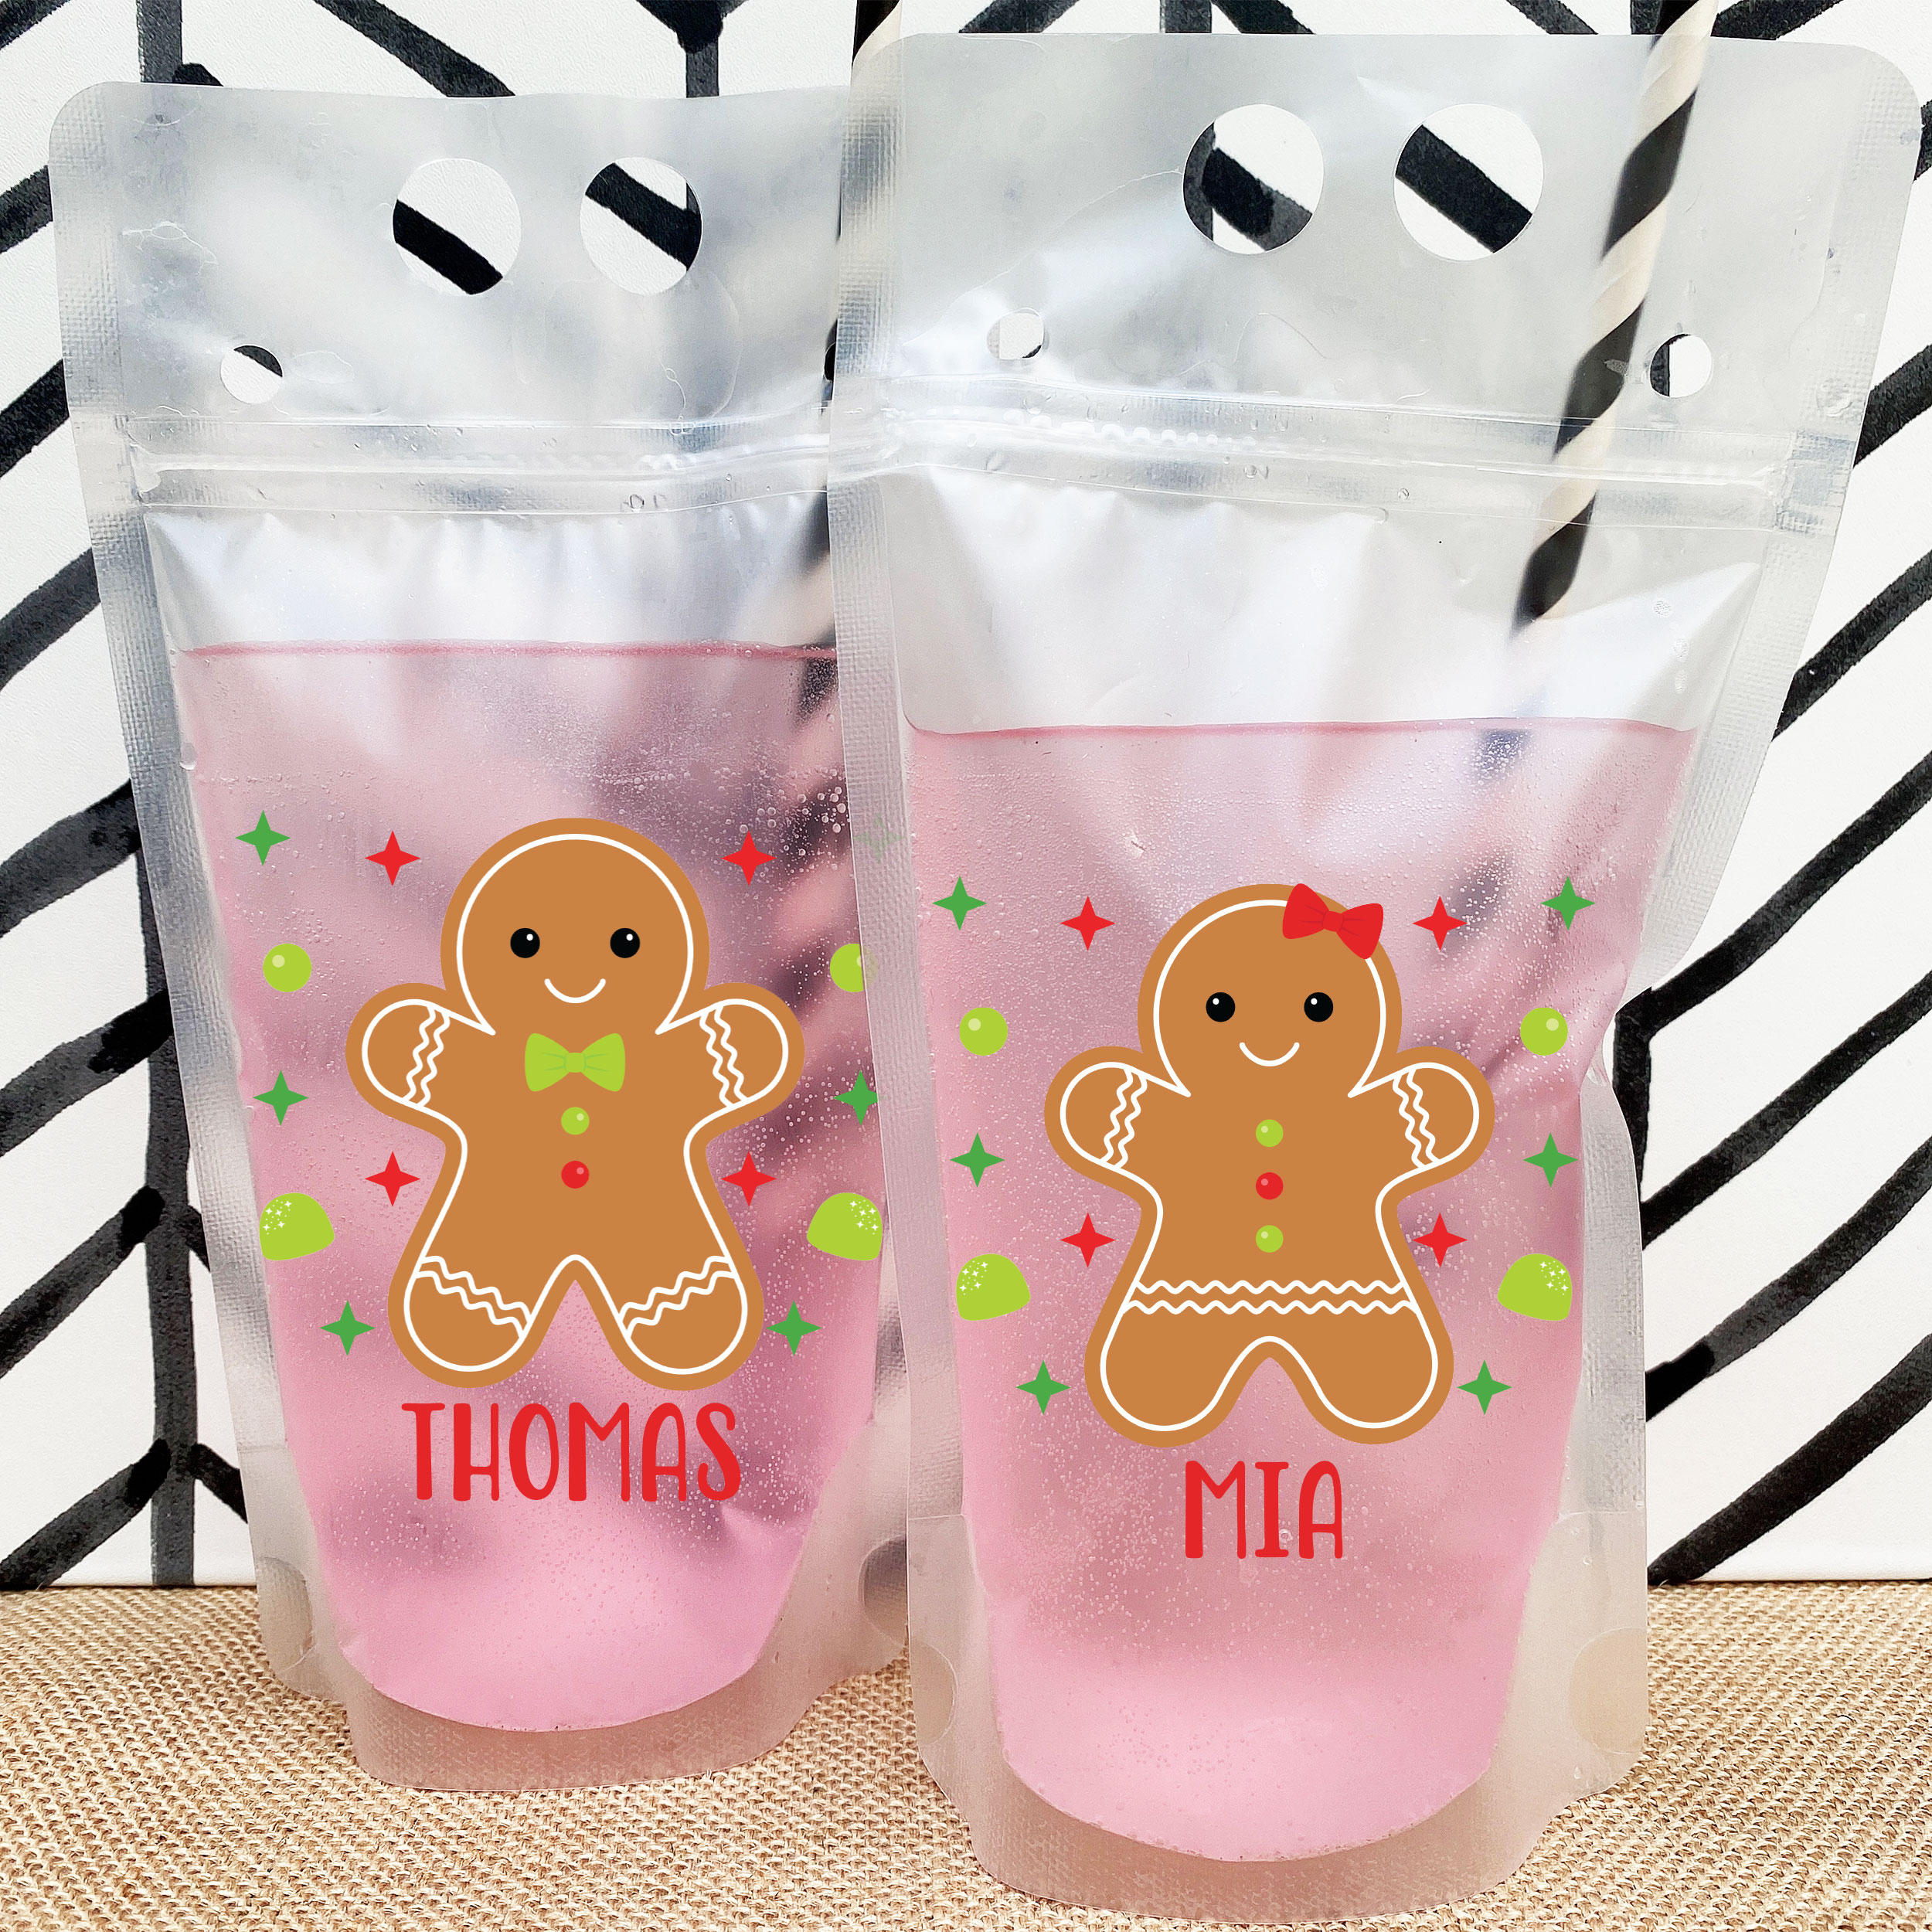 https://cdn11.bigcommerce.com/s-5grzuu6/images/stencil/original/products/5856/43373/Gingerbread-Christmas_Kids_Juice_Drink-Pouches__91713.1634581686.jpg?c=2